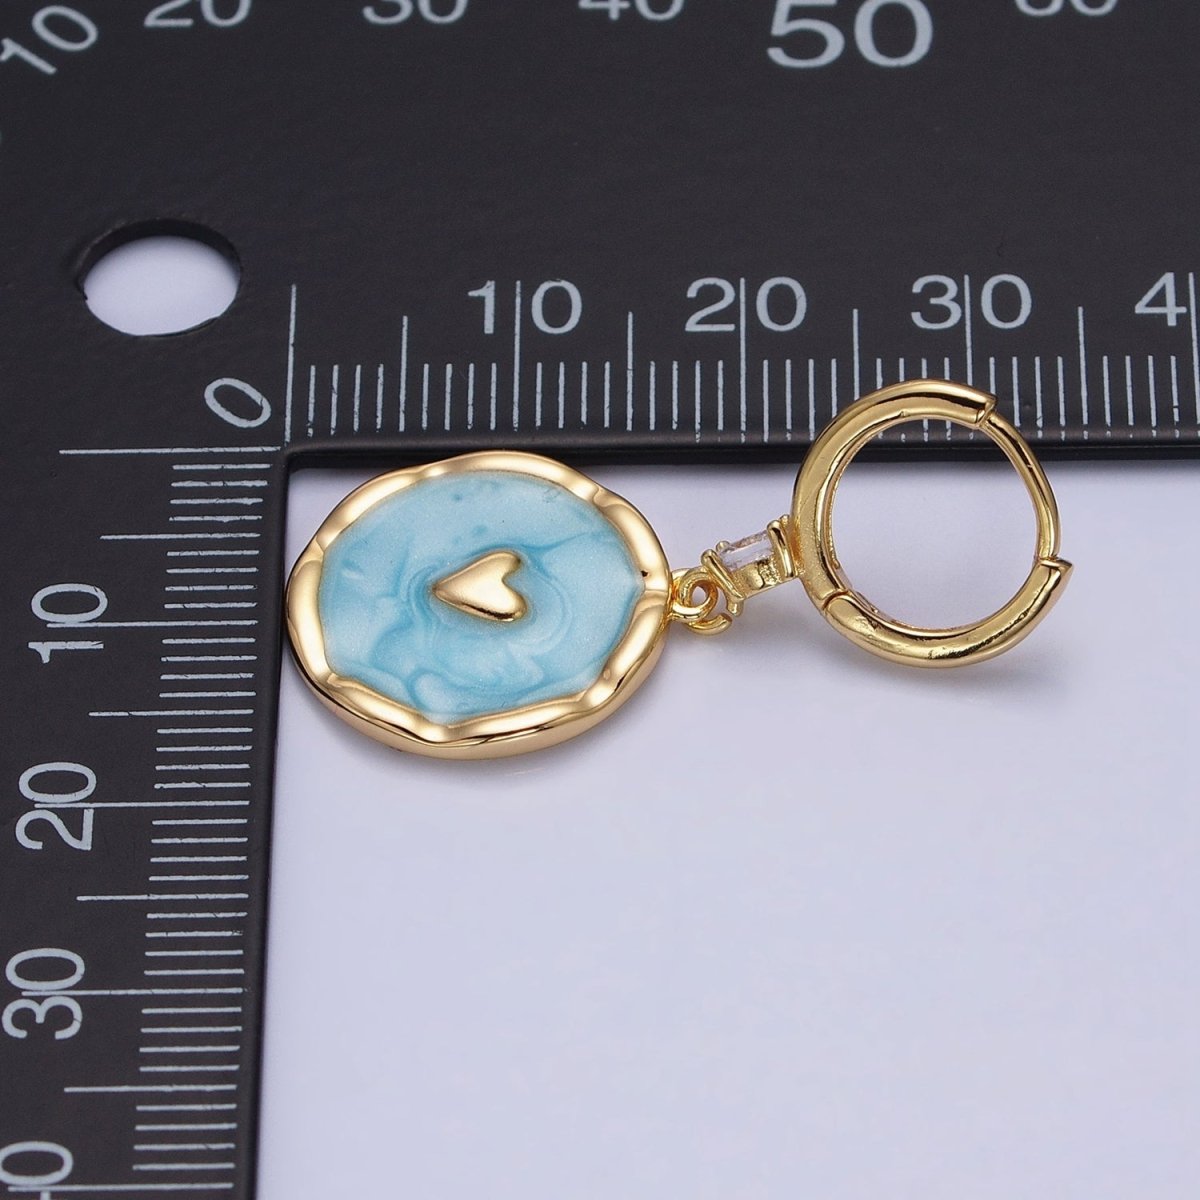 White, Blue, Pink Sparkly Enamel Heart Round CZ Drop Gold Huggie Earrings | AD794 - AD796 - DLUXCA